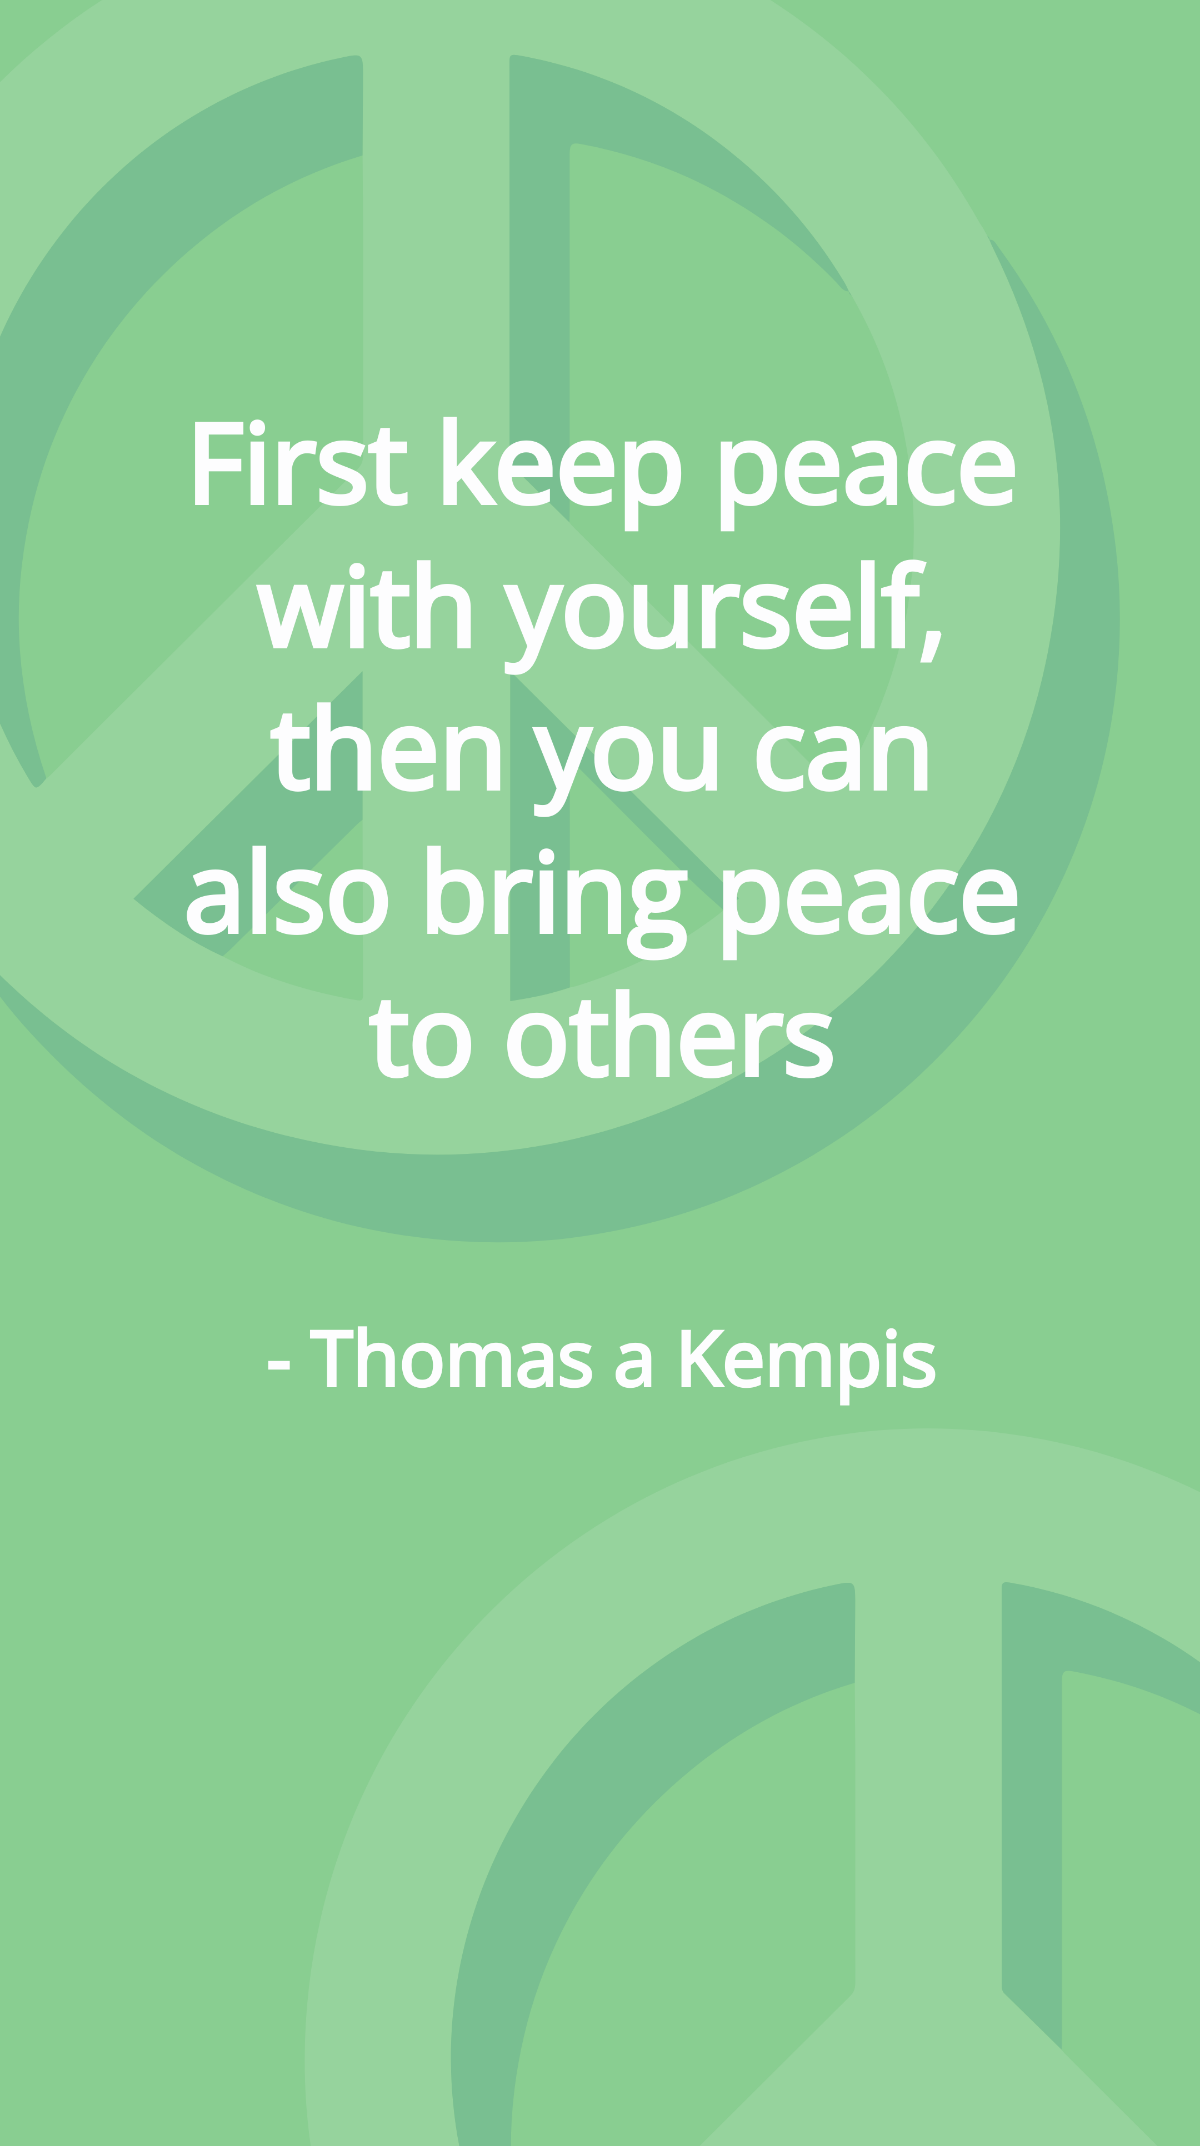 Thomas a Kempis - First keep peace with yourself, then you can also bring peace to others Template